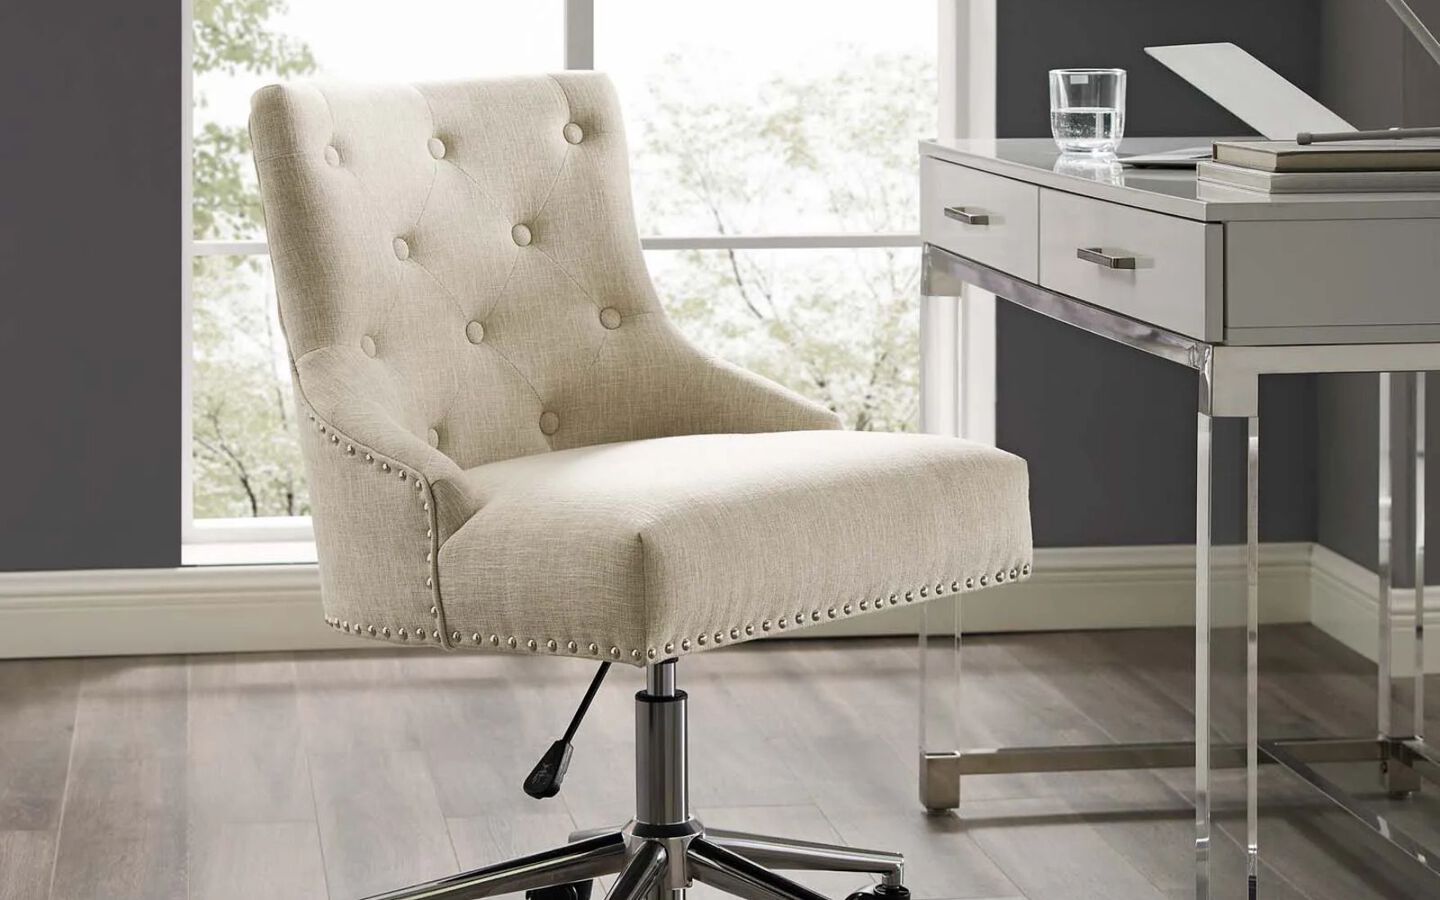 White upholstered swivel chair in front of white desk with clear glass legs